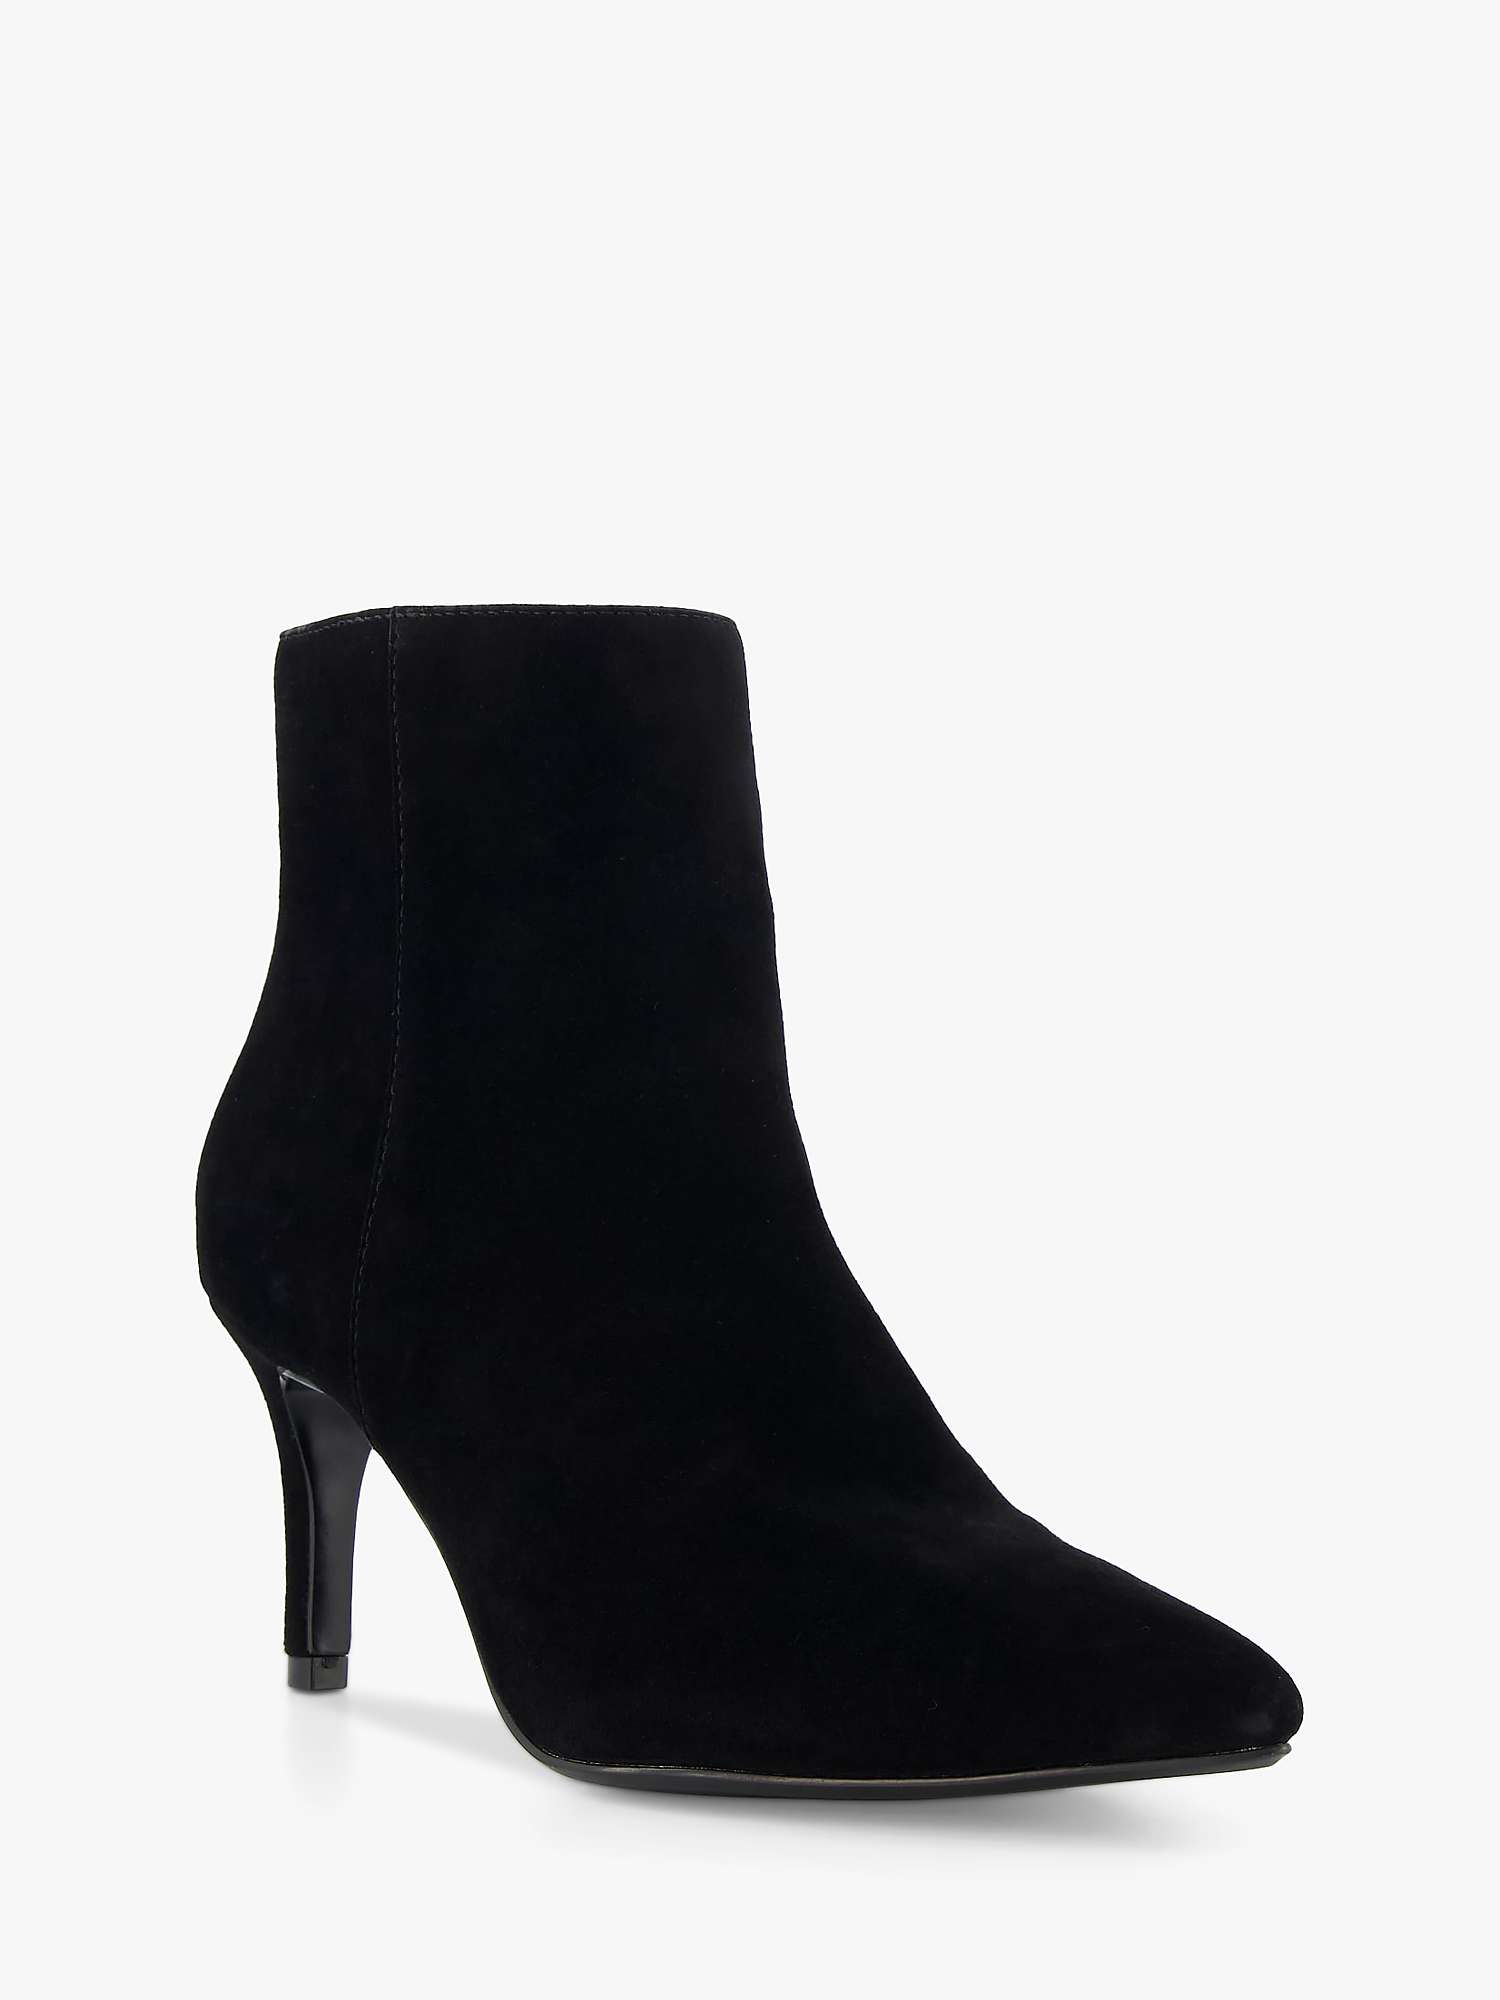 Buy Dune Obsessive2 Suede Pointed Toe Ankle Boots Online at johnlewis.com